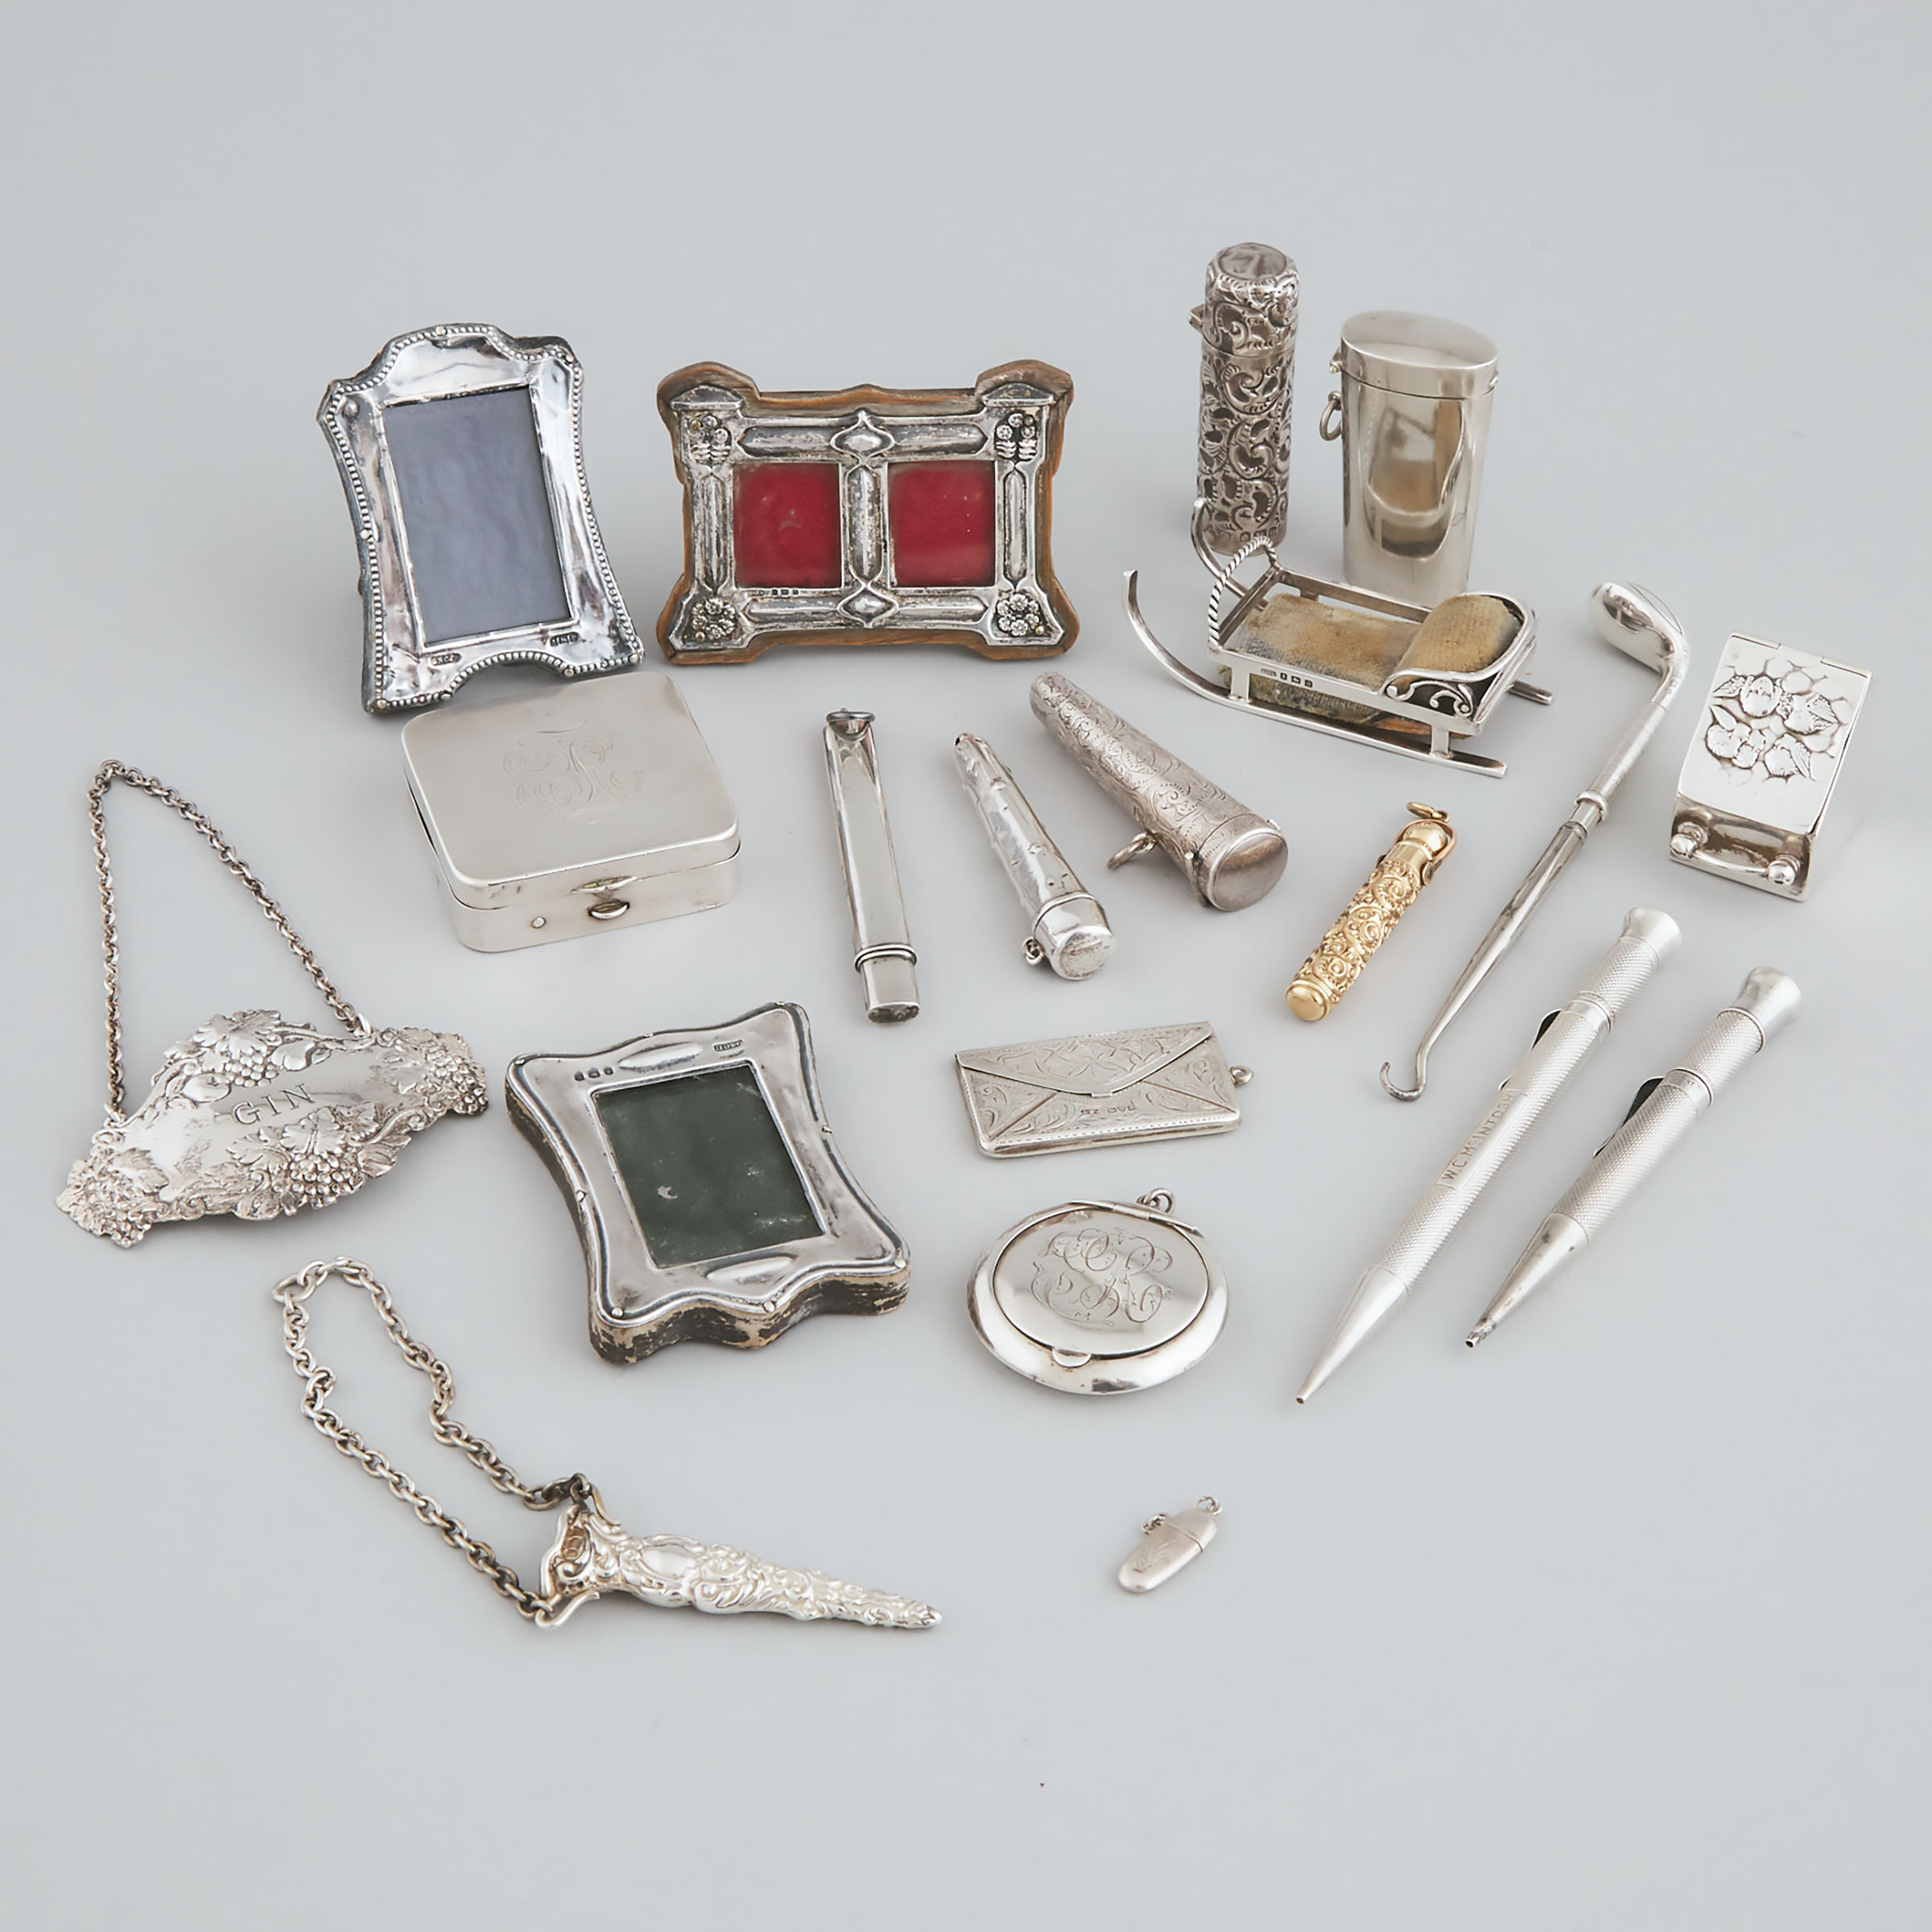 Group of Victorian and Later English and American Silver Novelties and Small Articles, late 19th/20th century